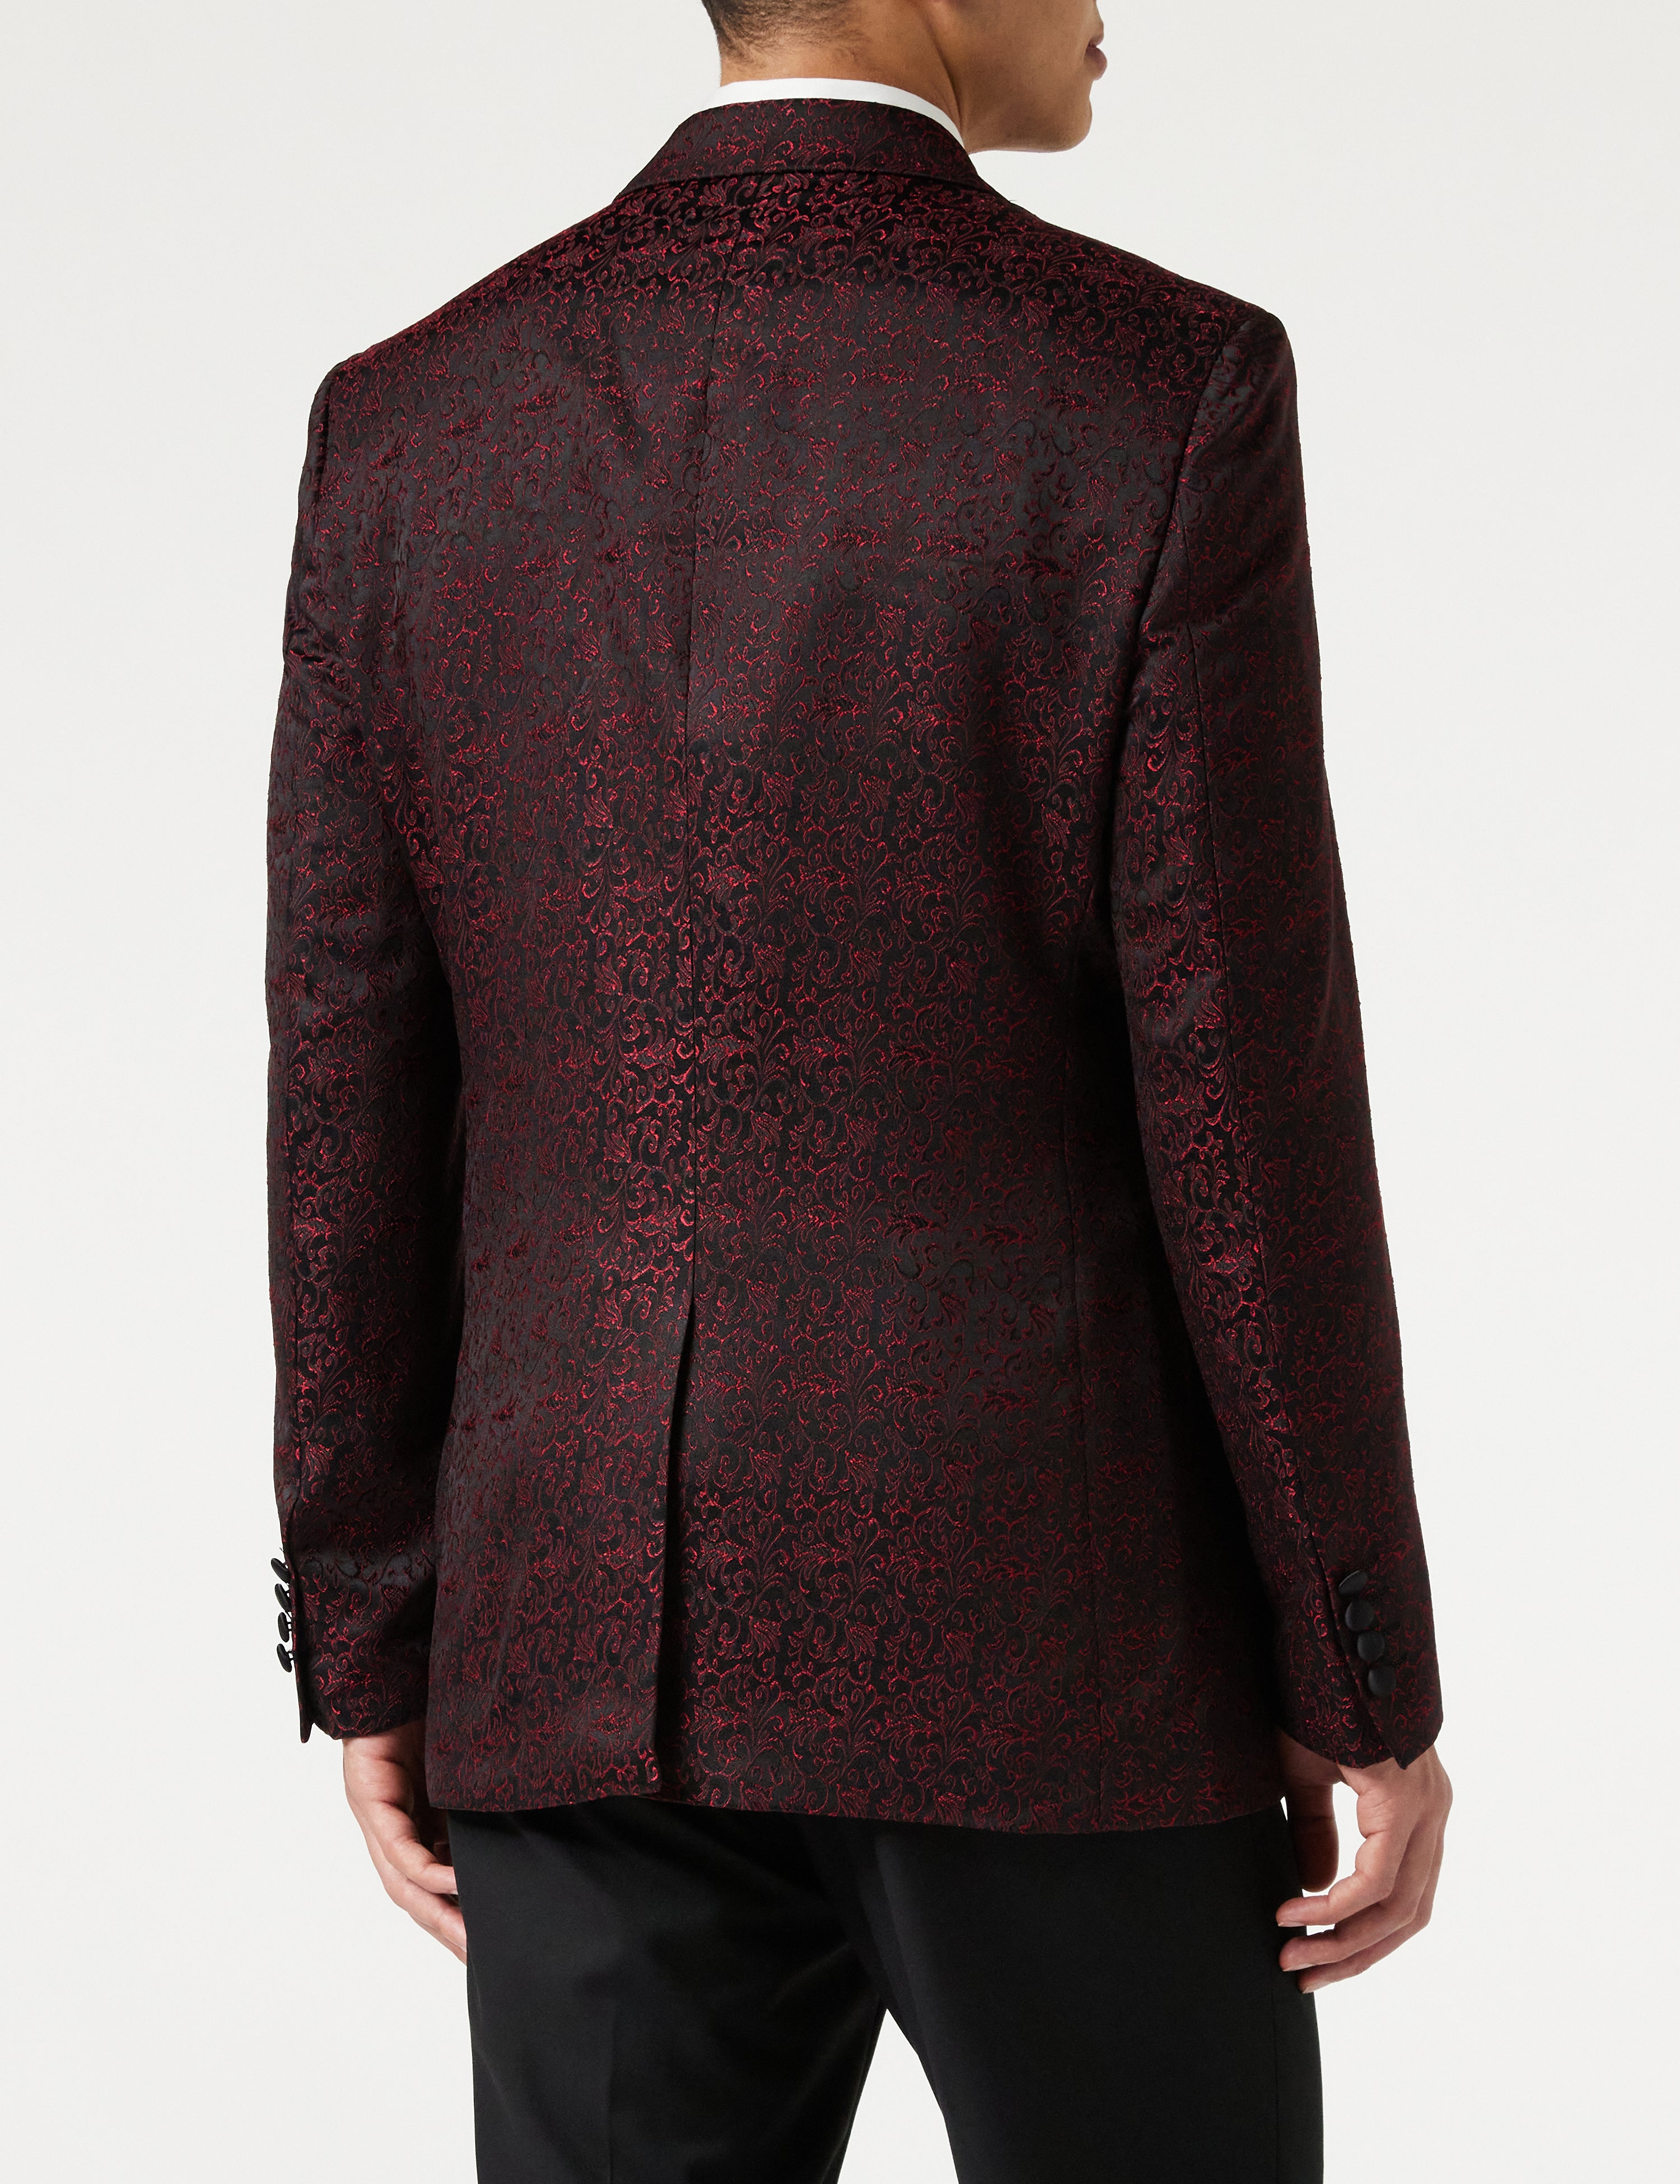 BRIAN - Floral Jacquard Print Red Tuxedo Jacket With Waistcoat